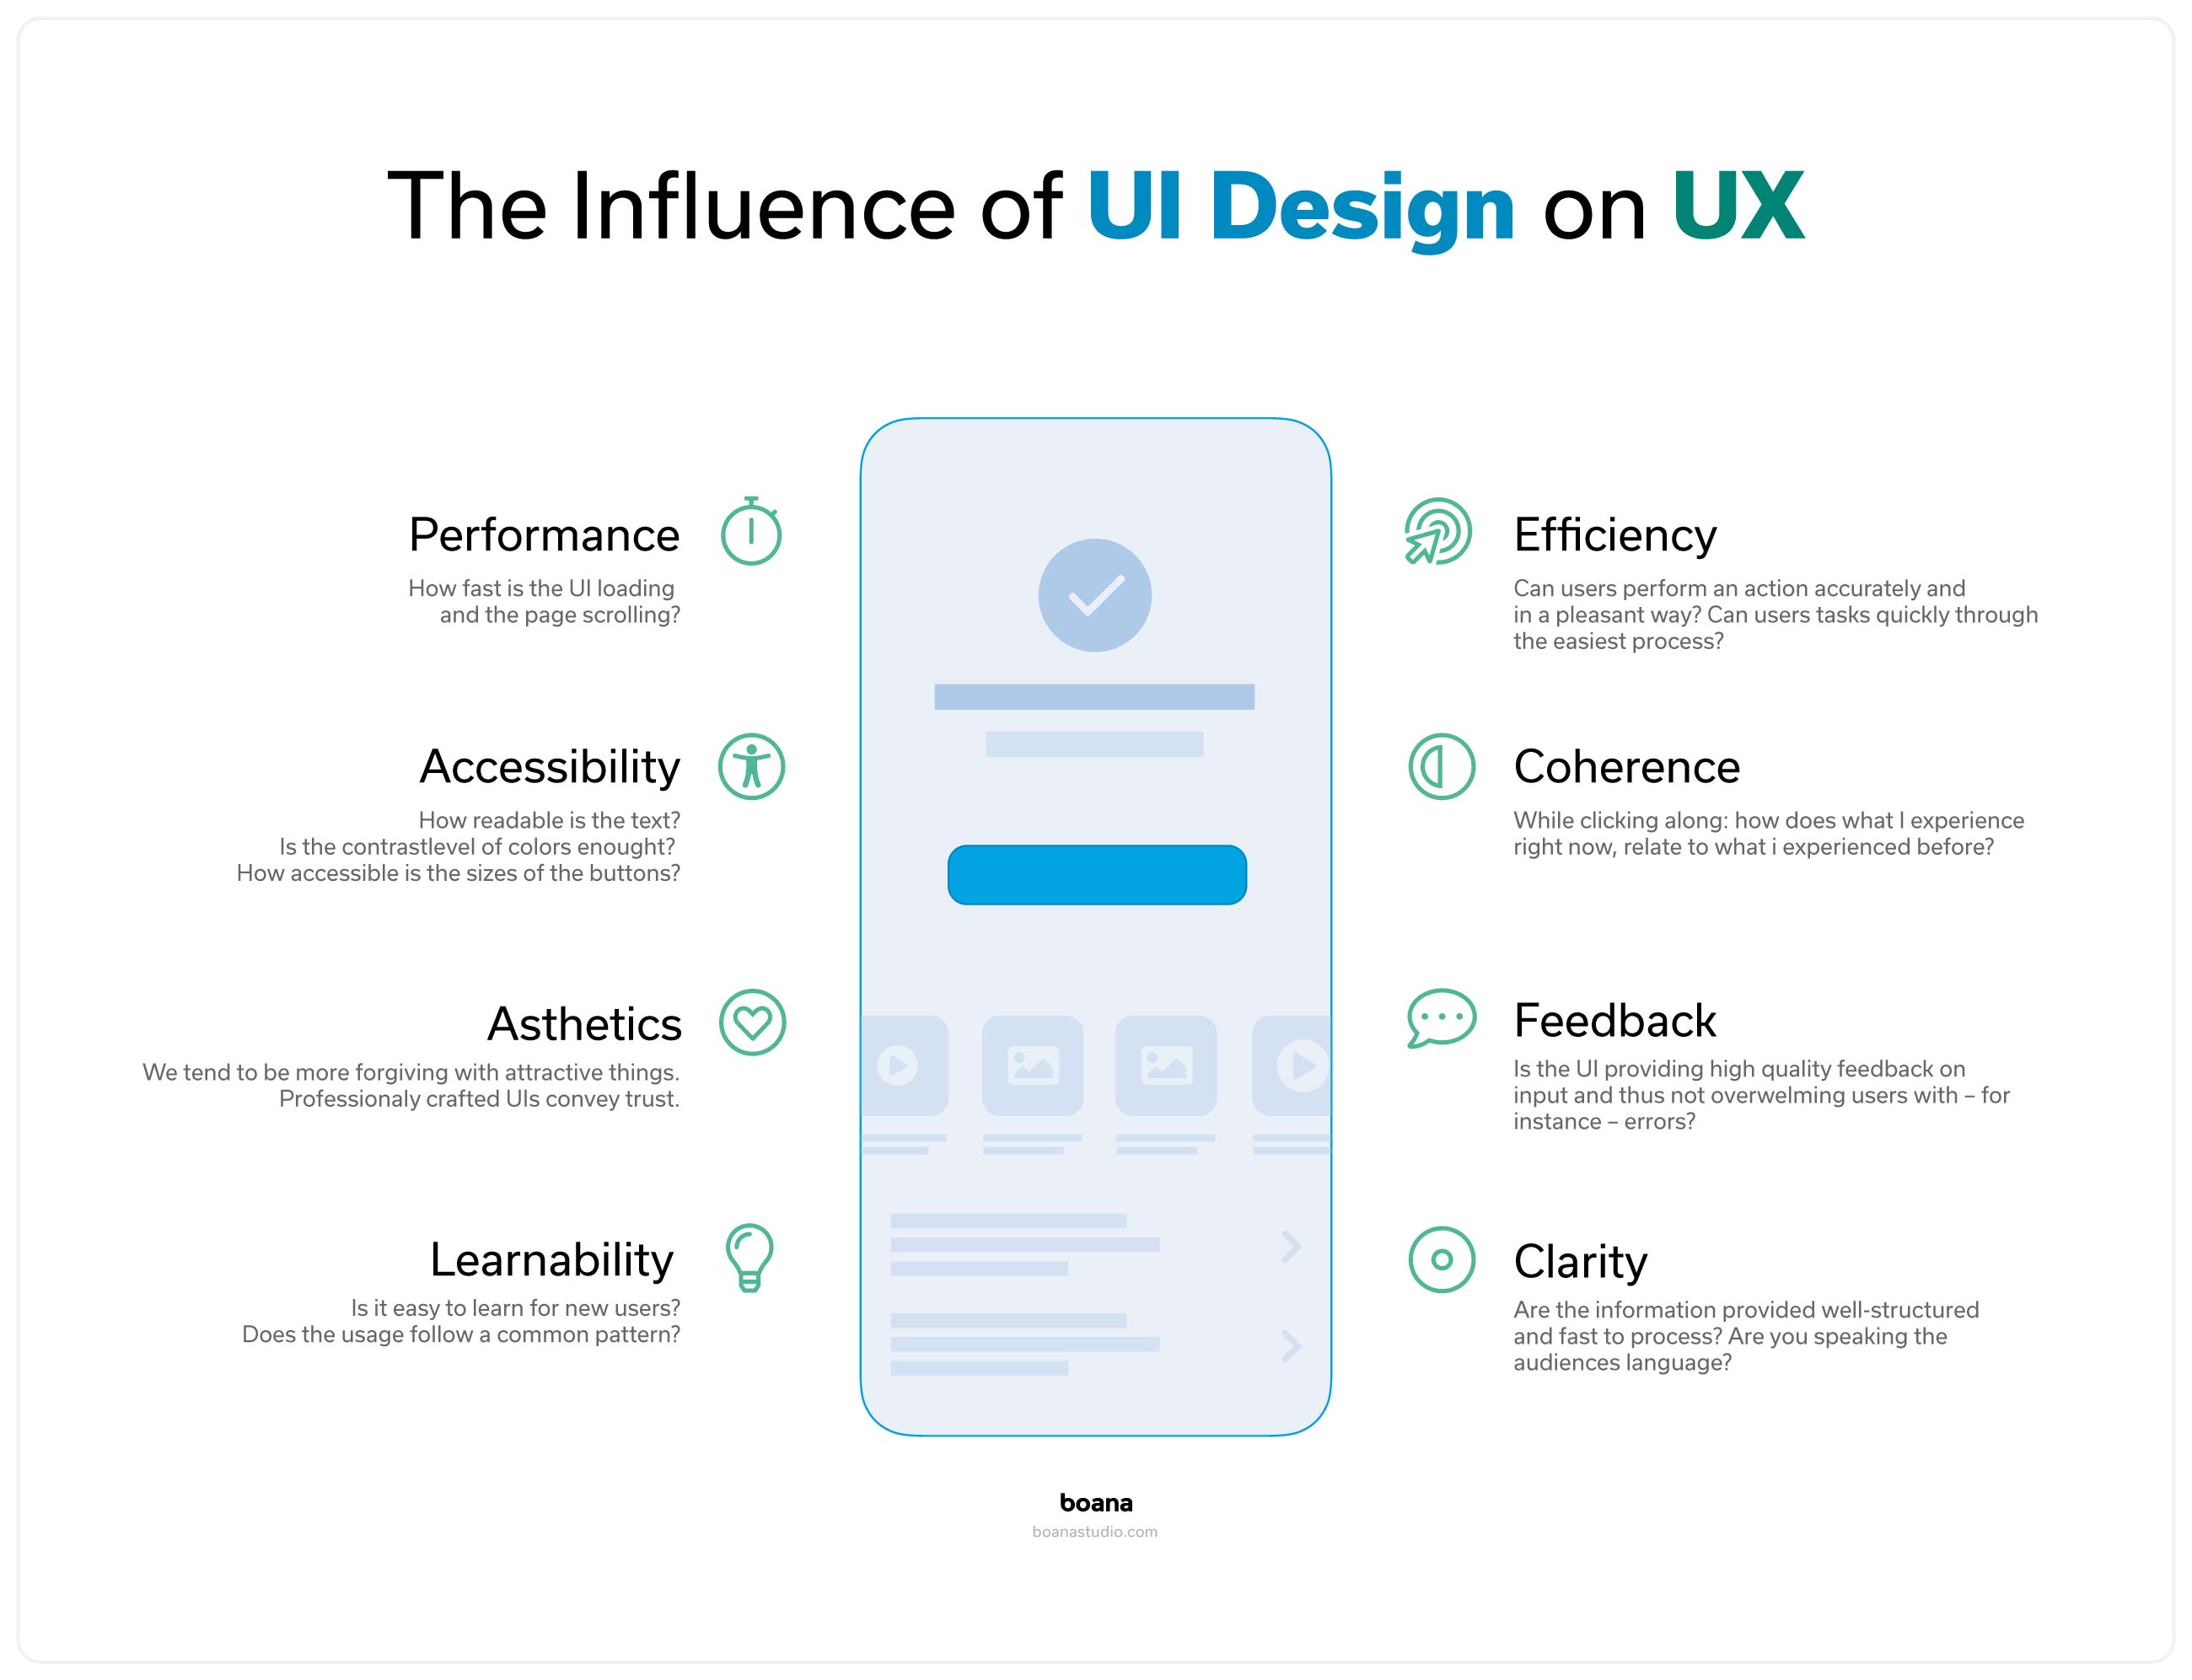 The influence of User Interface Design on User Experience